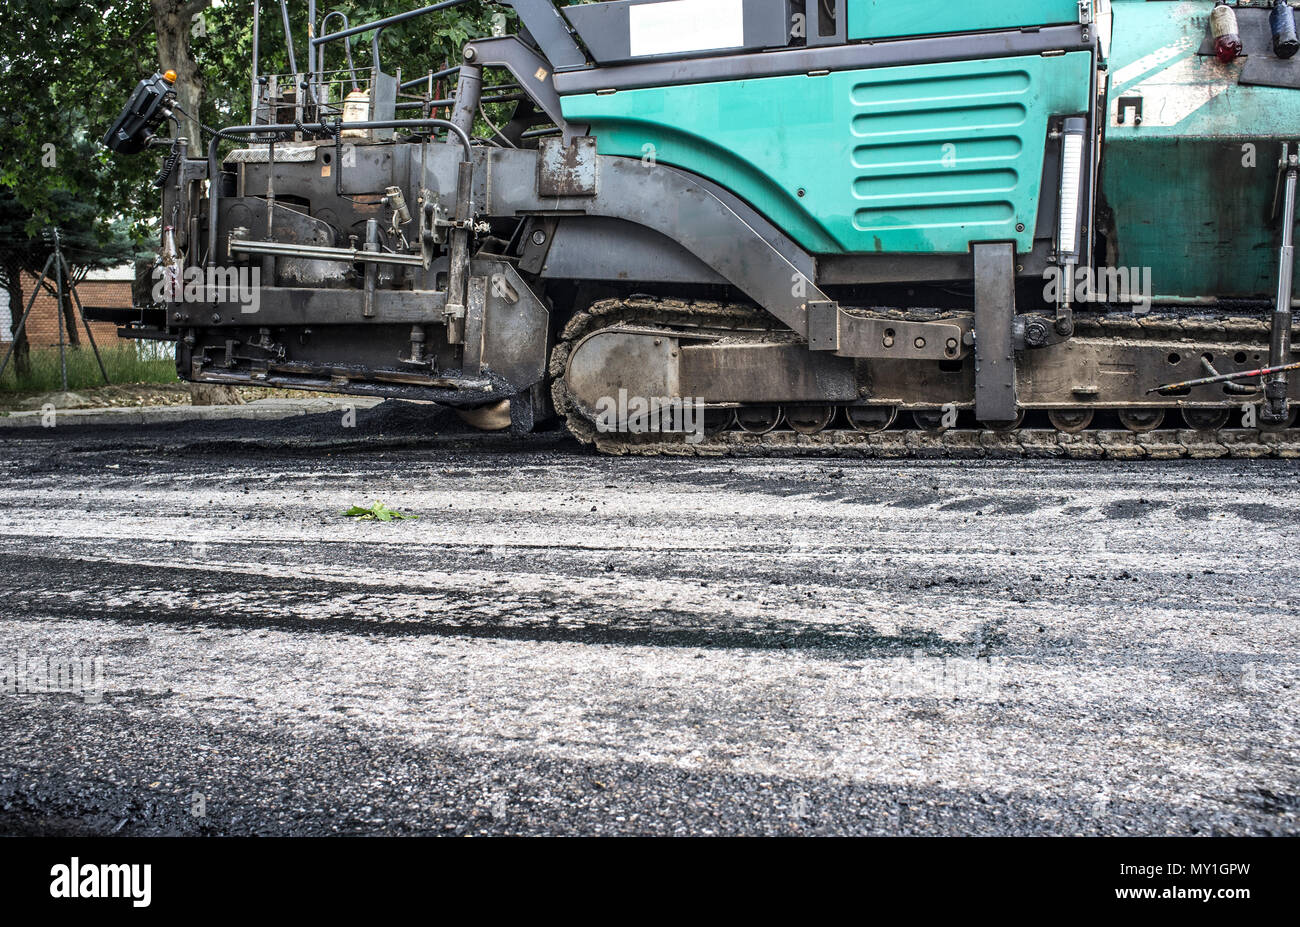 Work on the laying of asphalt in the city. Paving applicator machine or paver at work Stock Photo